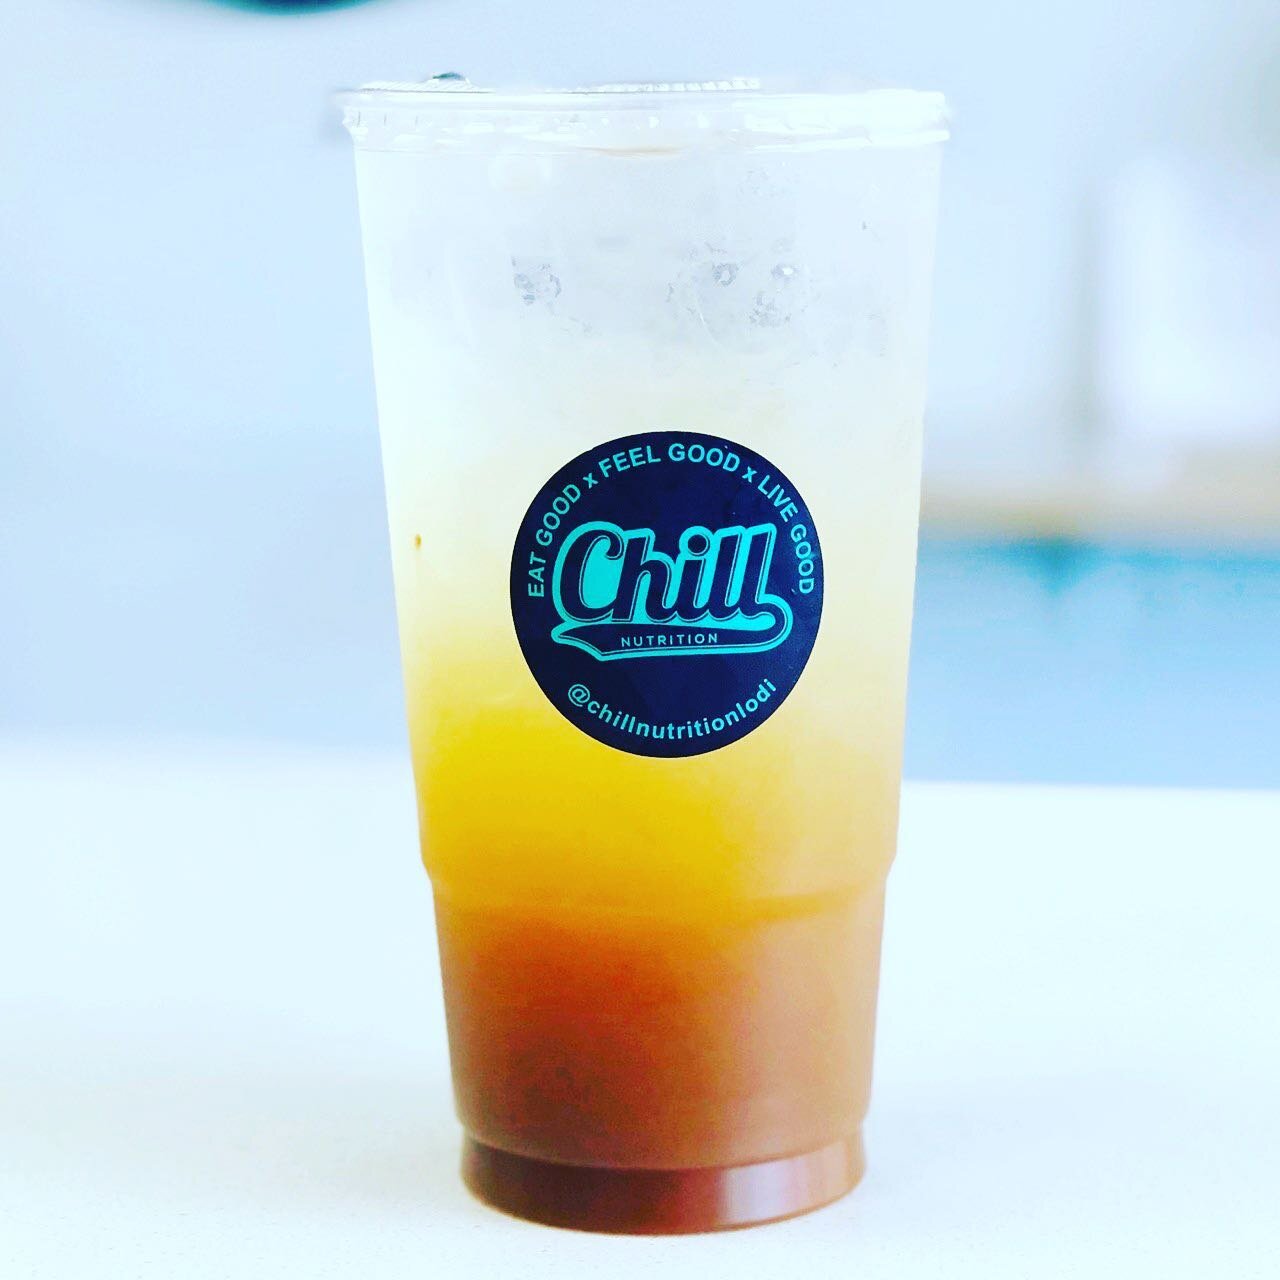 Did you know our lifted teas are a great alternative to coffee, soda, juice and energy drinks? 

They&rsquo;re a healthy and clean source of energy that also aids in healthy digestion! 

#chillnutritionlodi #lodidrinks #energydrinks #lodihealthy #lif